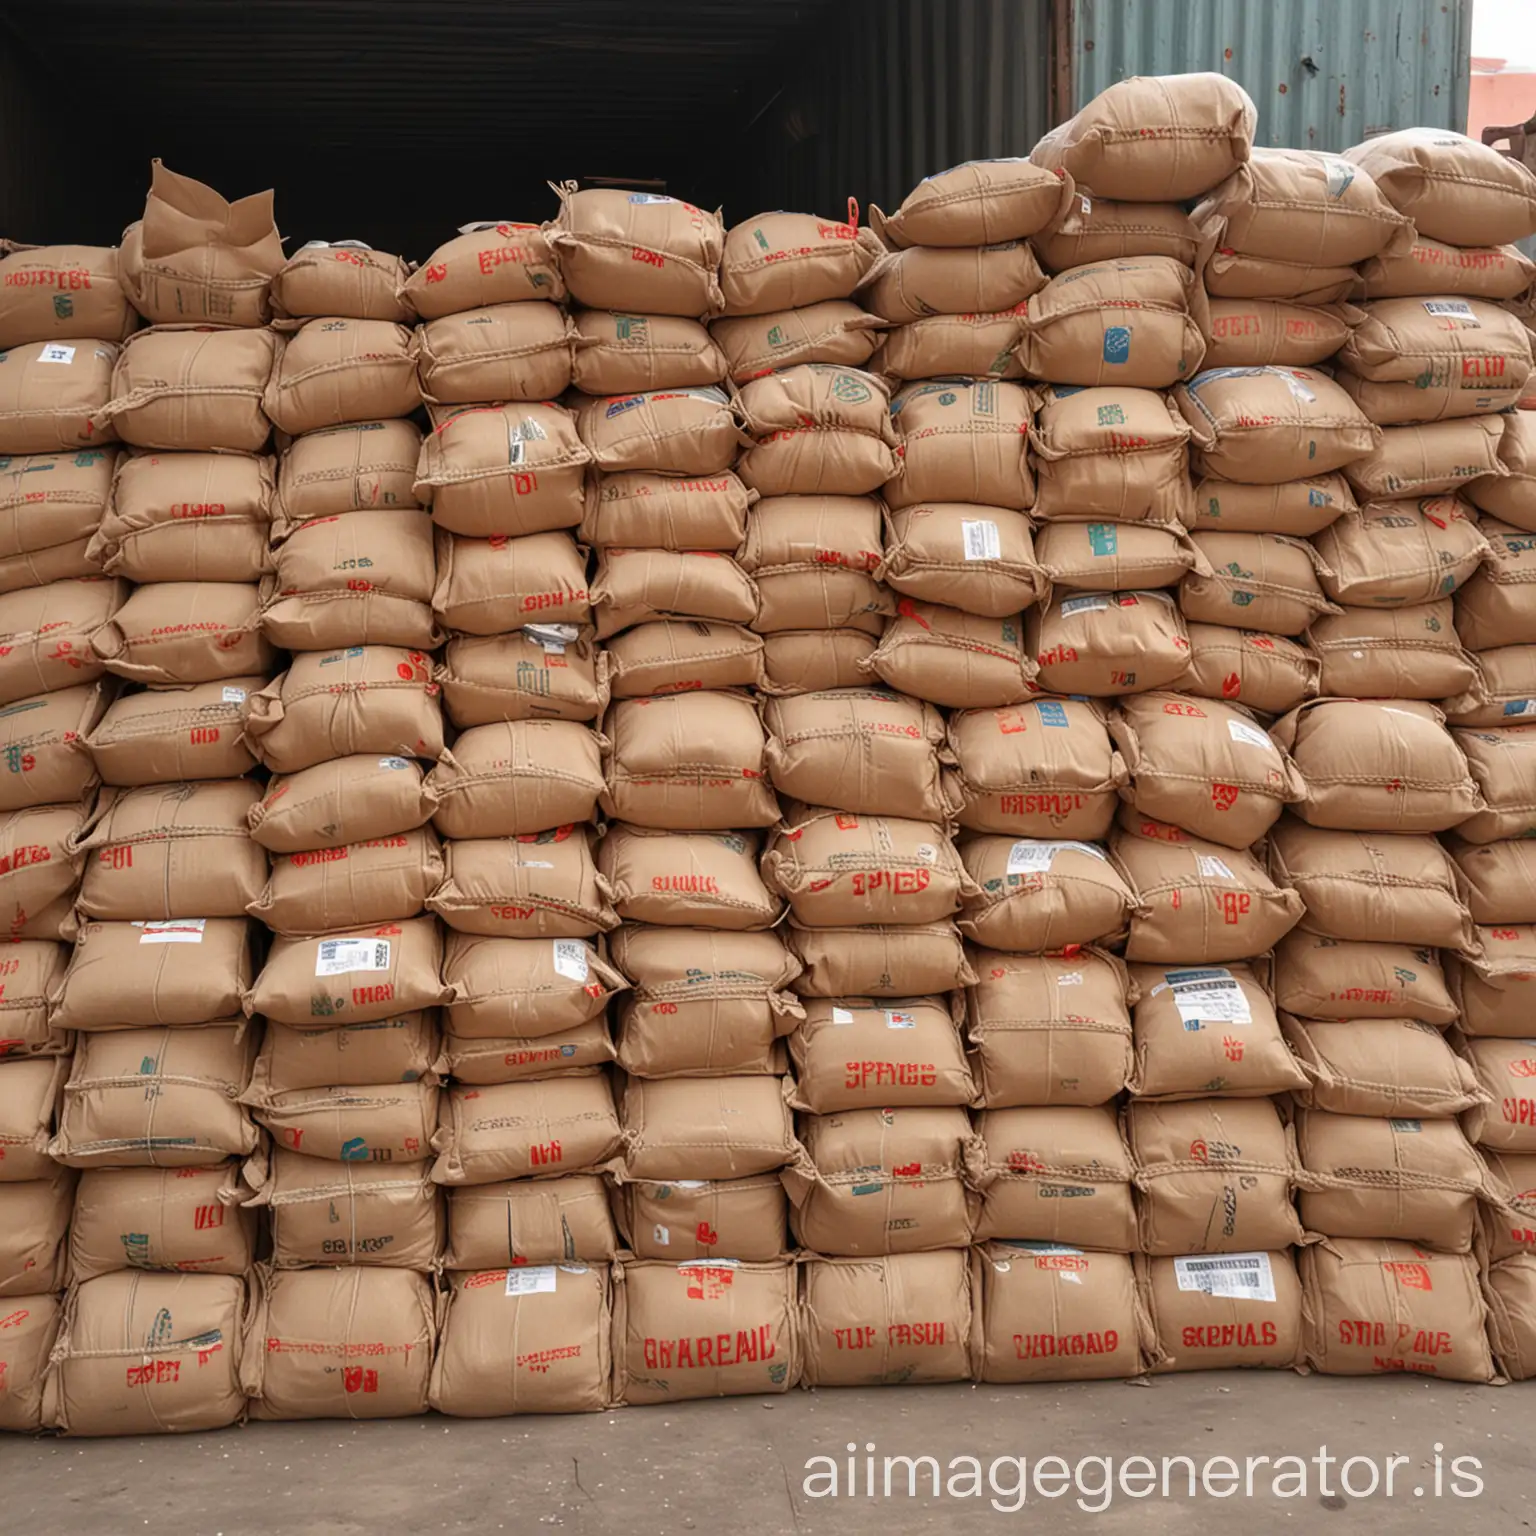 Loading-25kg-Bags-of-Spices-Warehouse-Logistics-and-Distribution